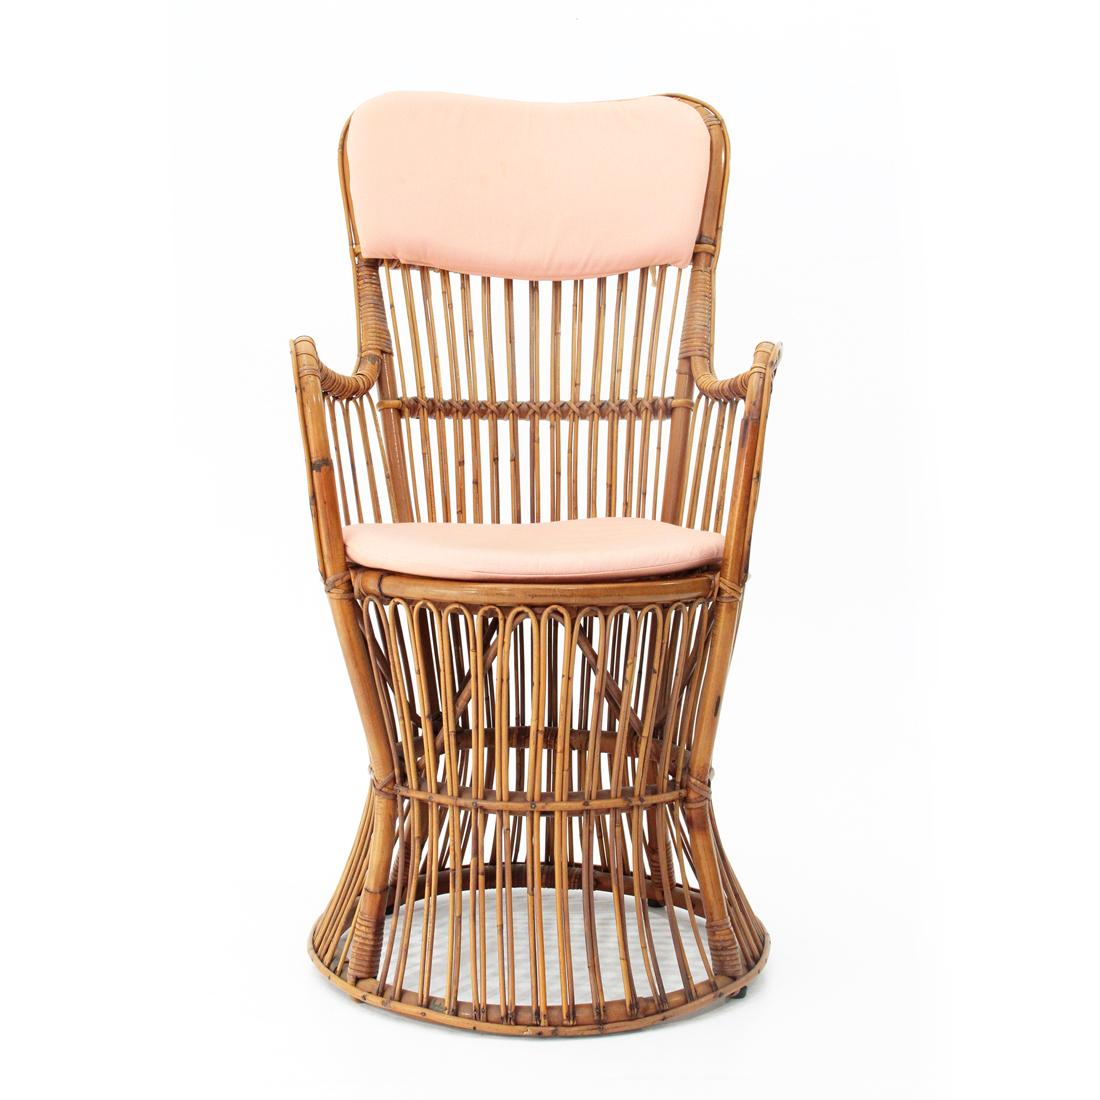 Italian Midcentury Rattan Armchair by Dal Vera, 1950s In Good Condition For Sale In Savona, IT